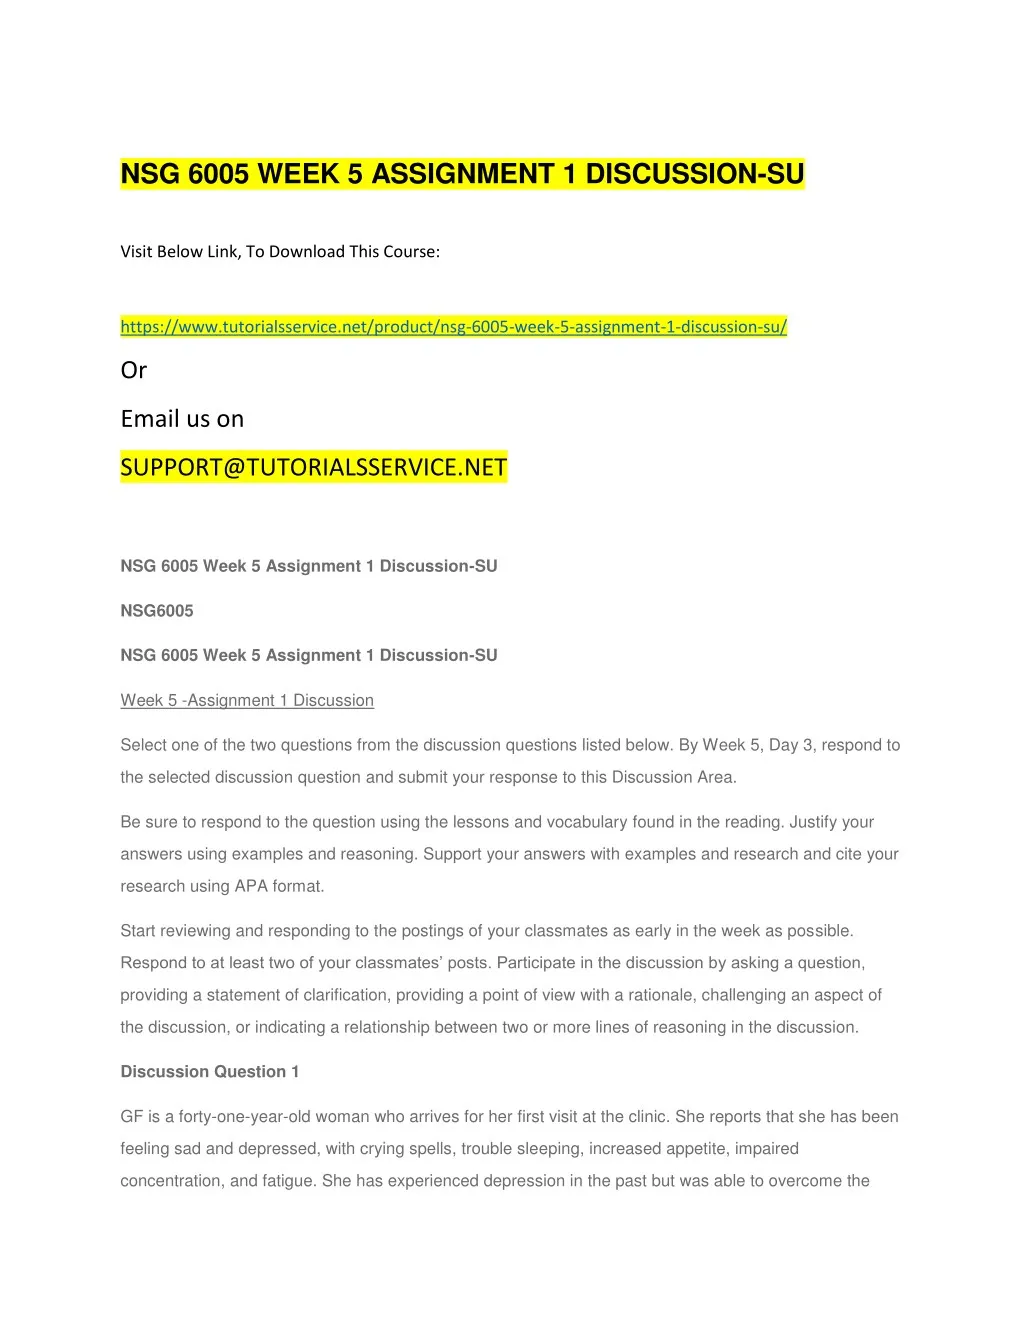 nsg 6005 week 5 assignment 1 discussion su